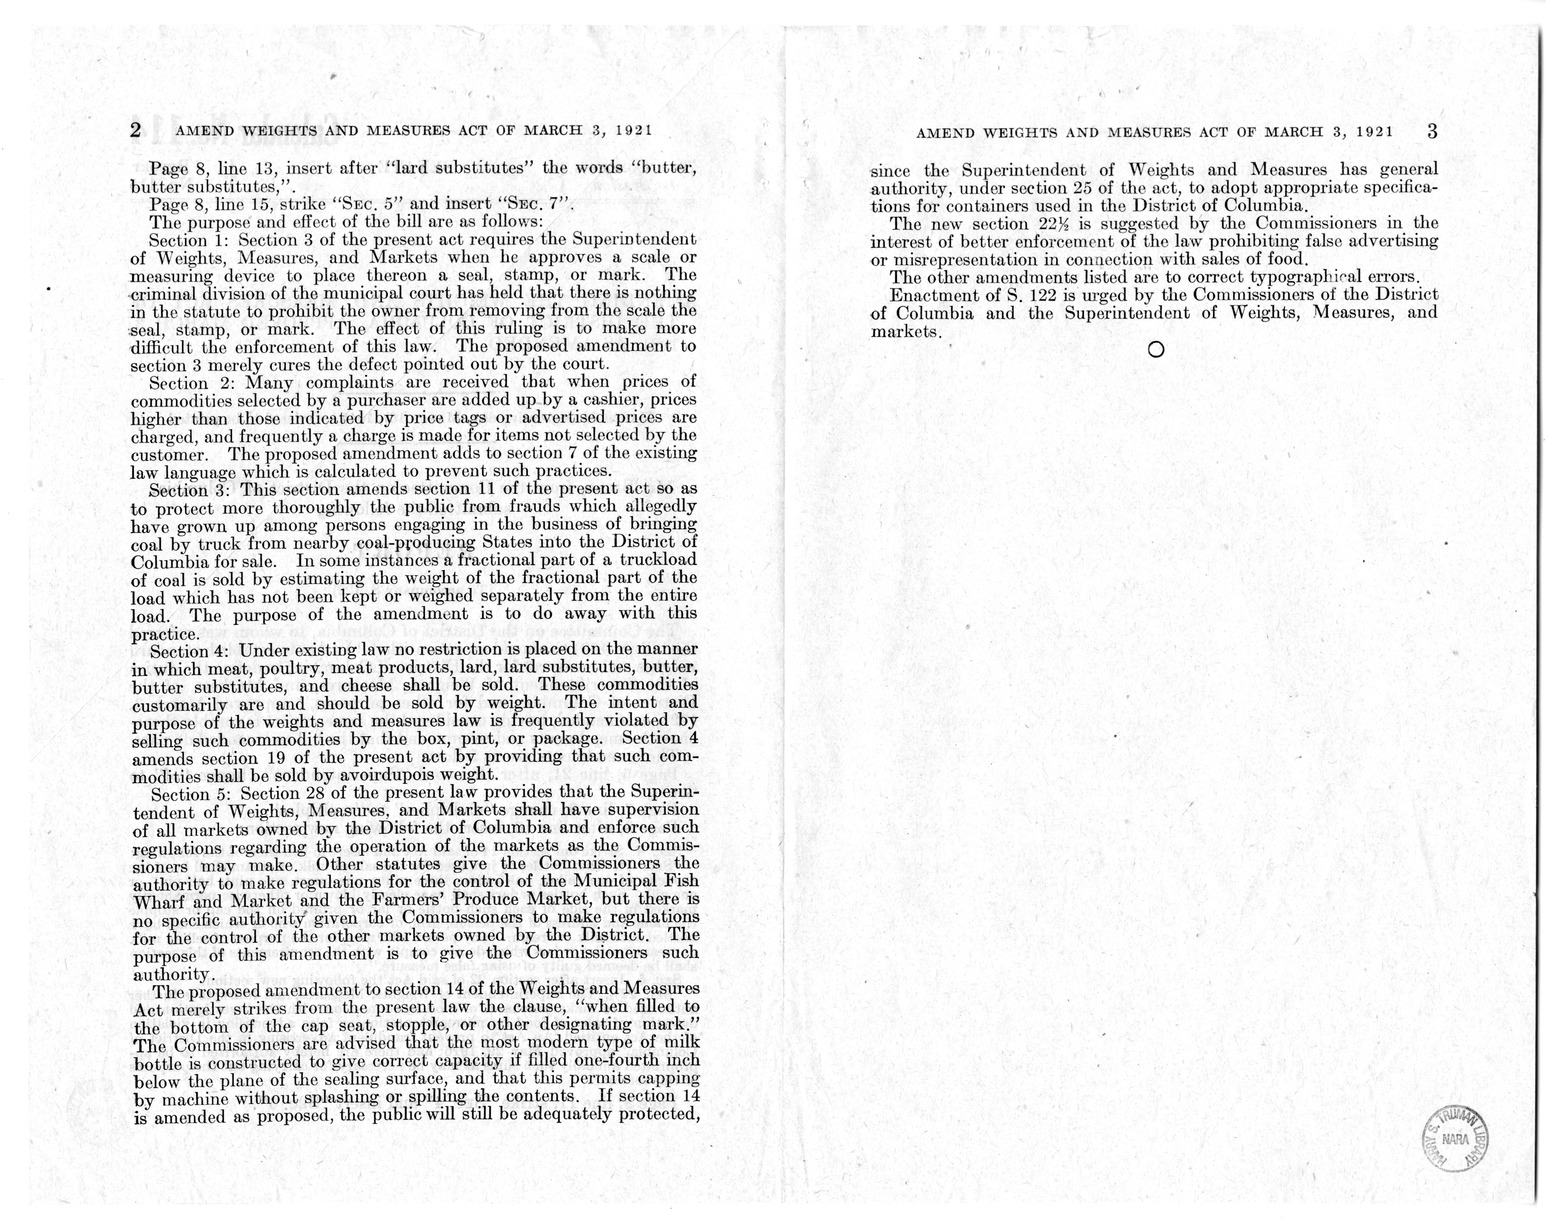 Memorandum from Frederick J. Bailey to M. C. Latta, S. 122, to Amend an Act for Standard Weights and Measures for the District of Columbia, with Attachments